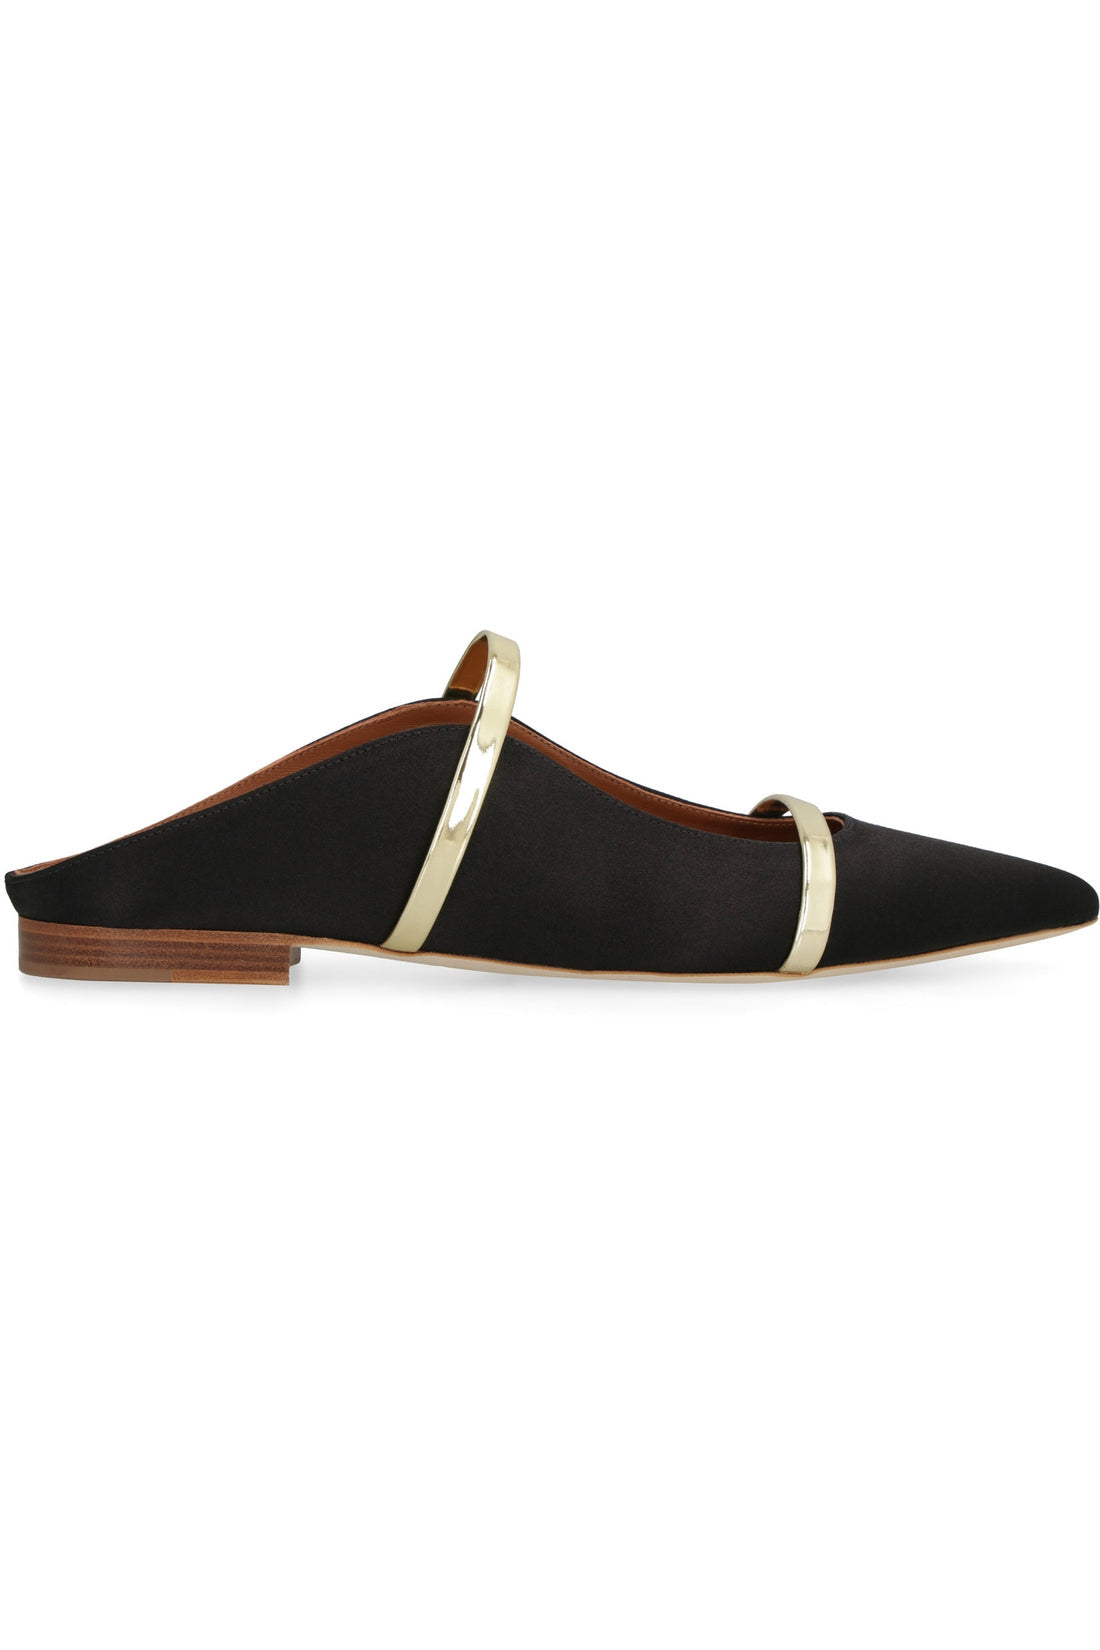 Malone Souliers-OUTLET-SALE-Maureen pointy-toe ballet flats-ARCHIVIST